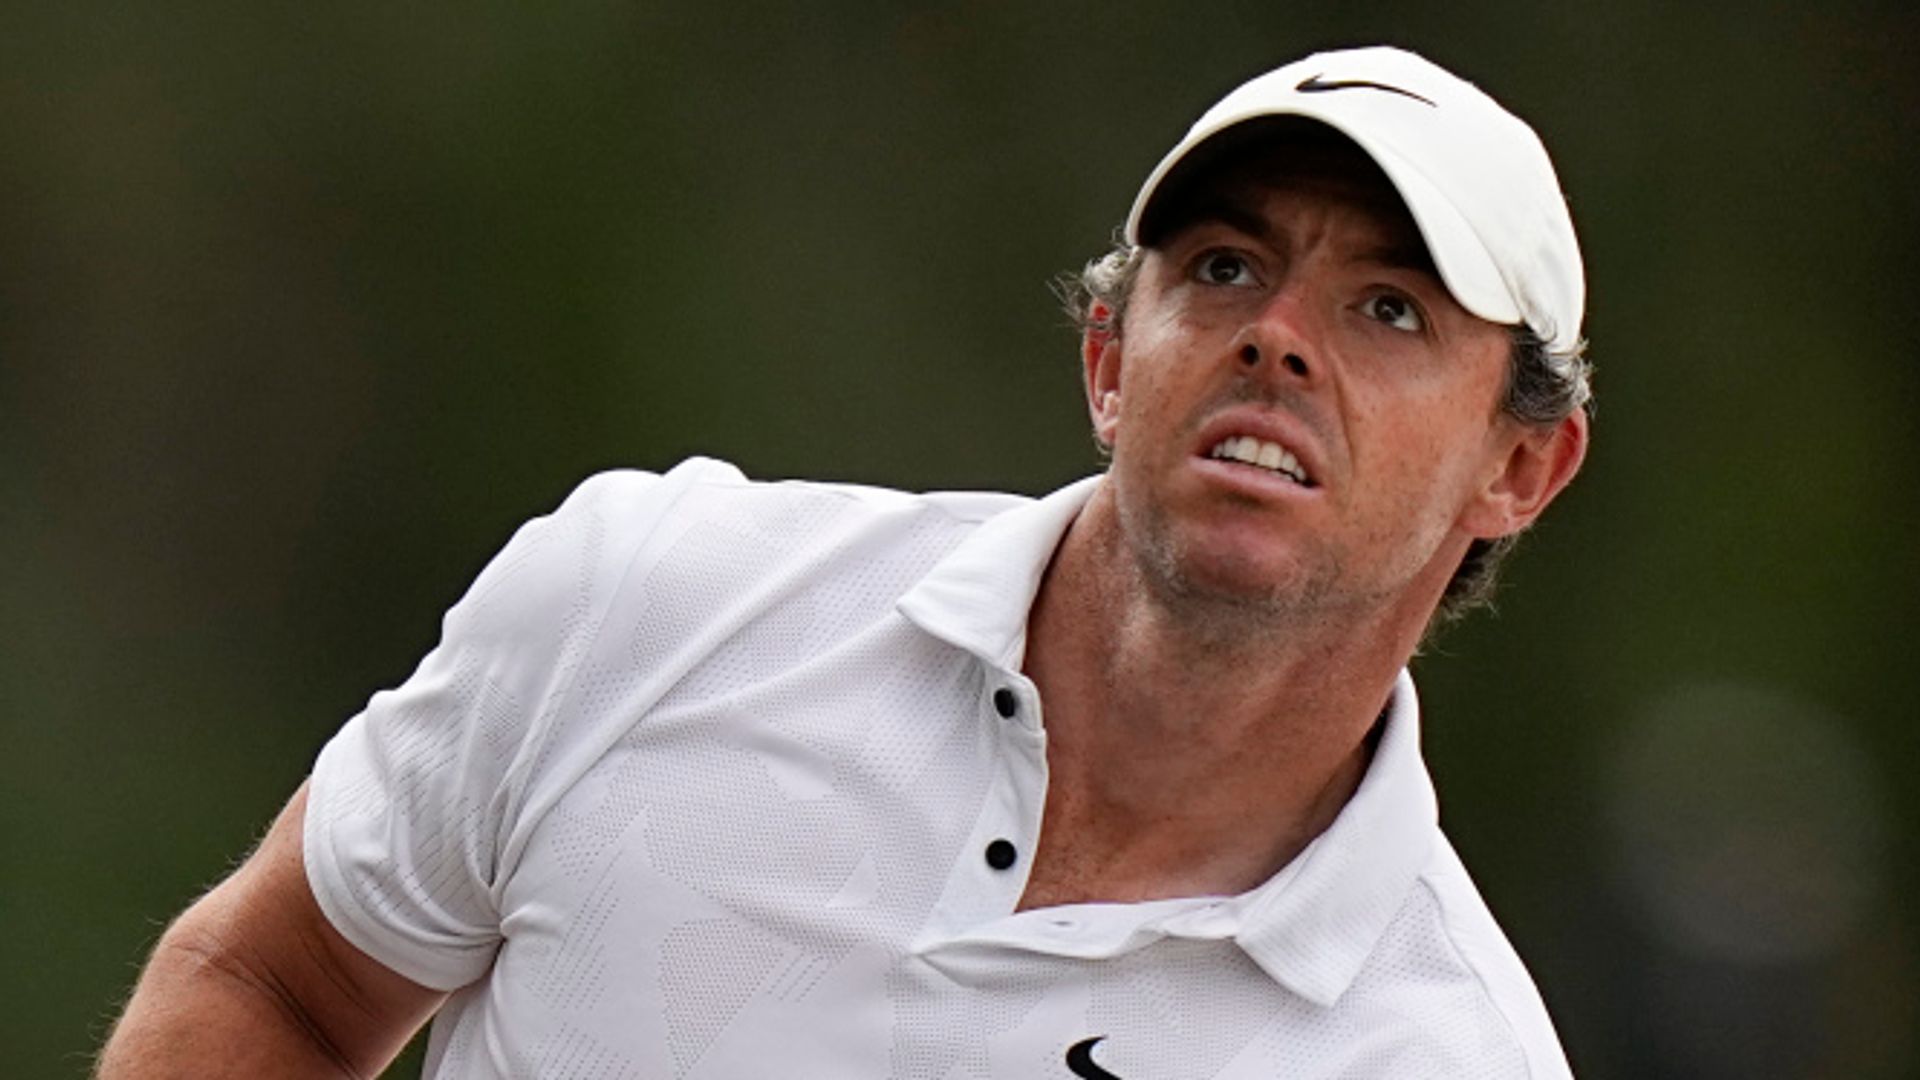 McIlroy faces battle to make cut after dismal start at The Players